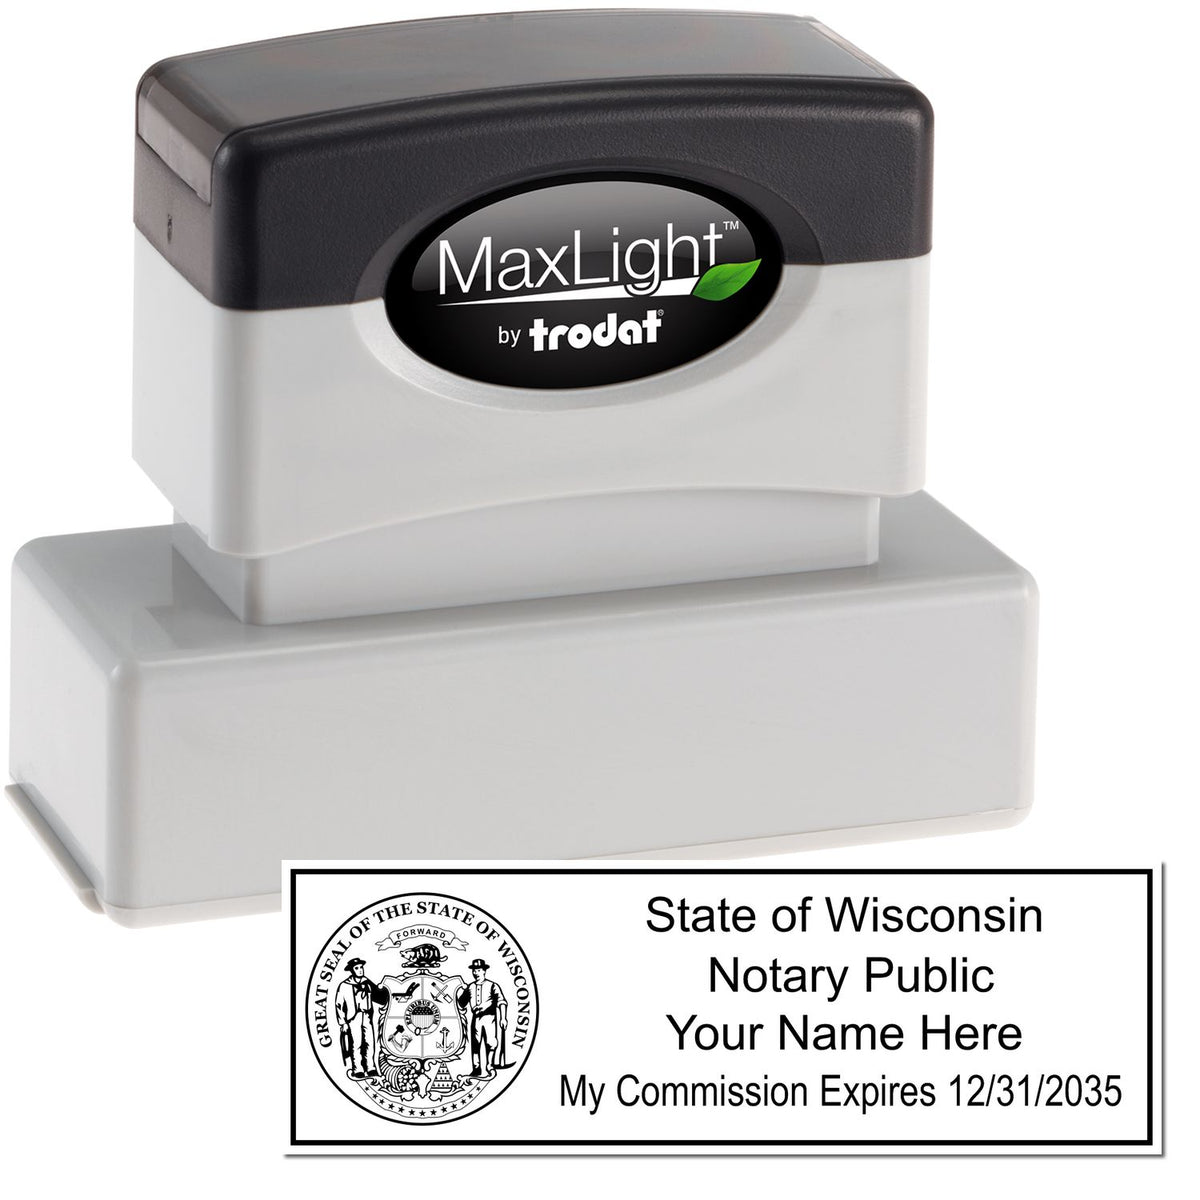 The main image for the MaxLight Premium Pre-Inked Wisconsin State Seal Notarial Stamp depicting a sample of the imprint and electronic files